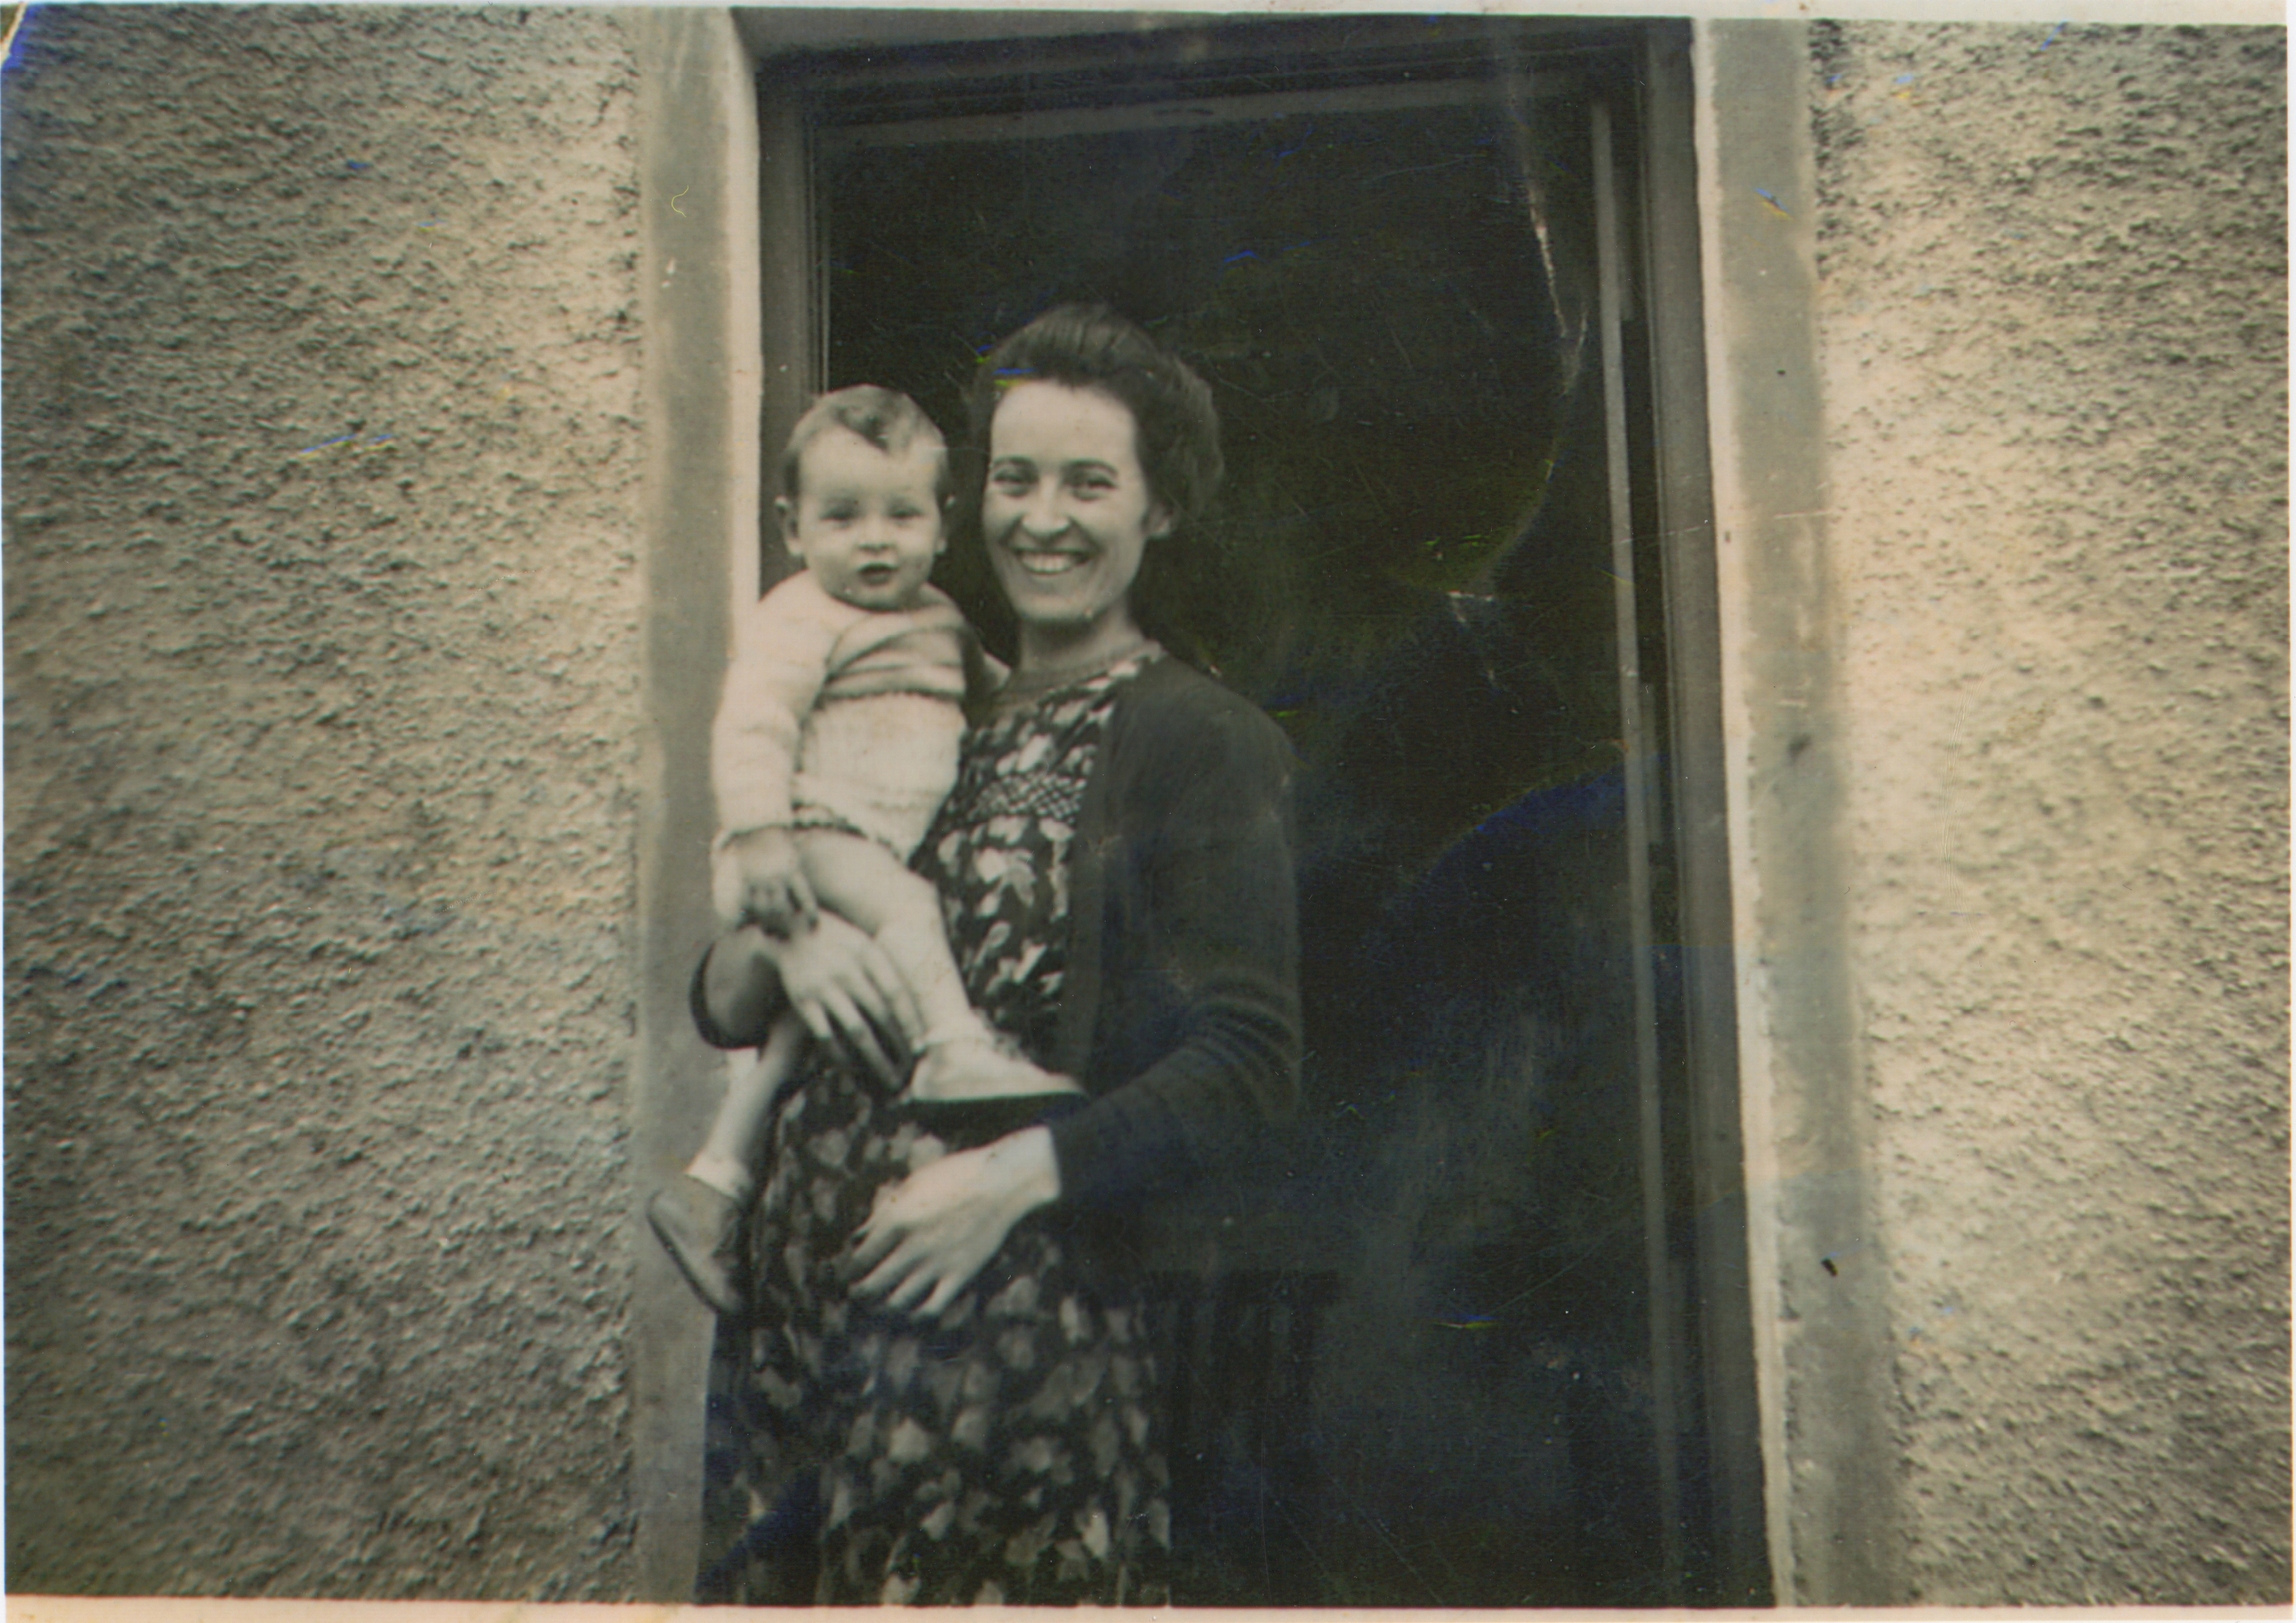 4.Dowling and his mother 1950